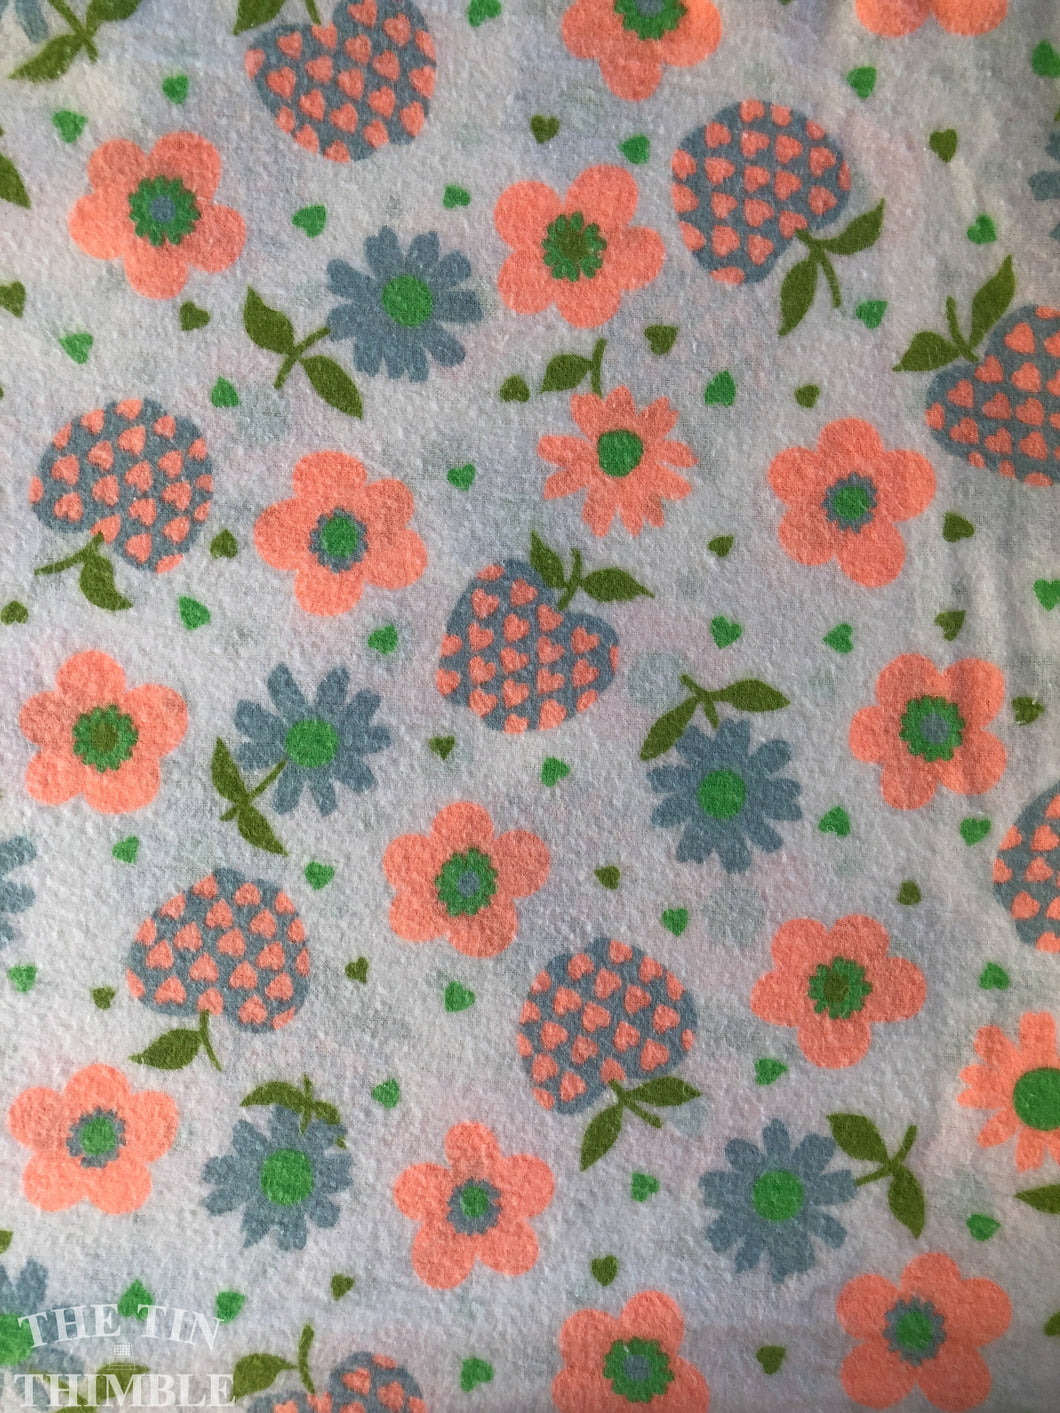 Authentic Vintage Flannel - Thick and Soft with Floral Print - 2 7/8 Yard Piece x 35